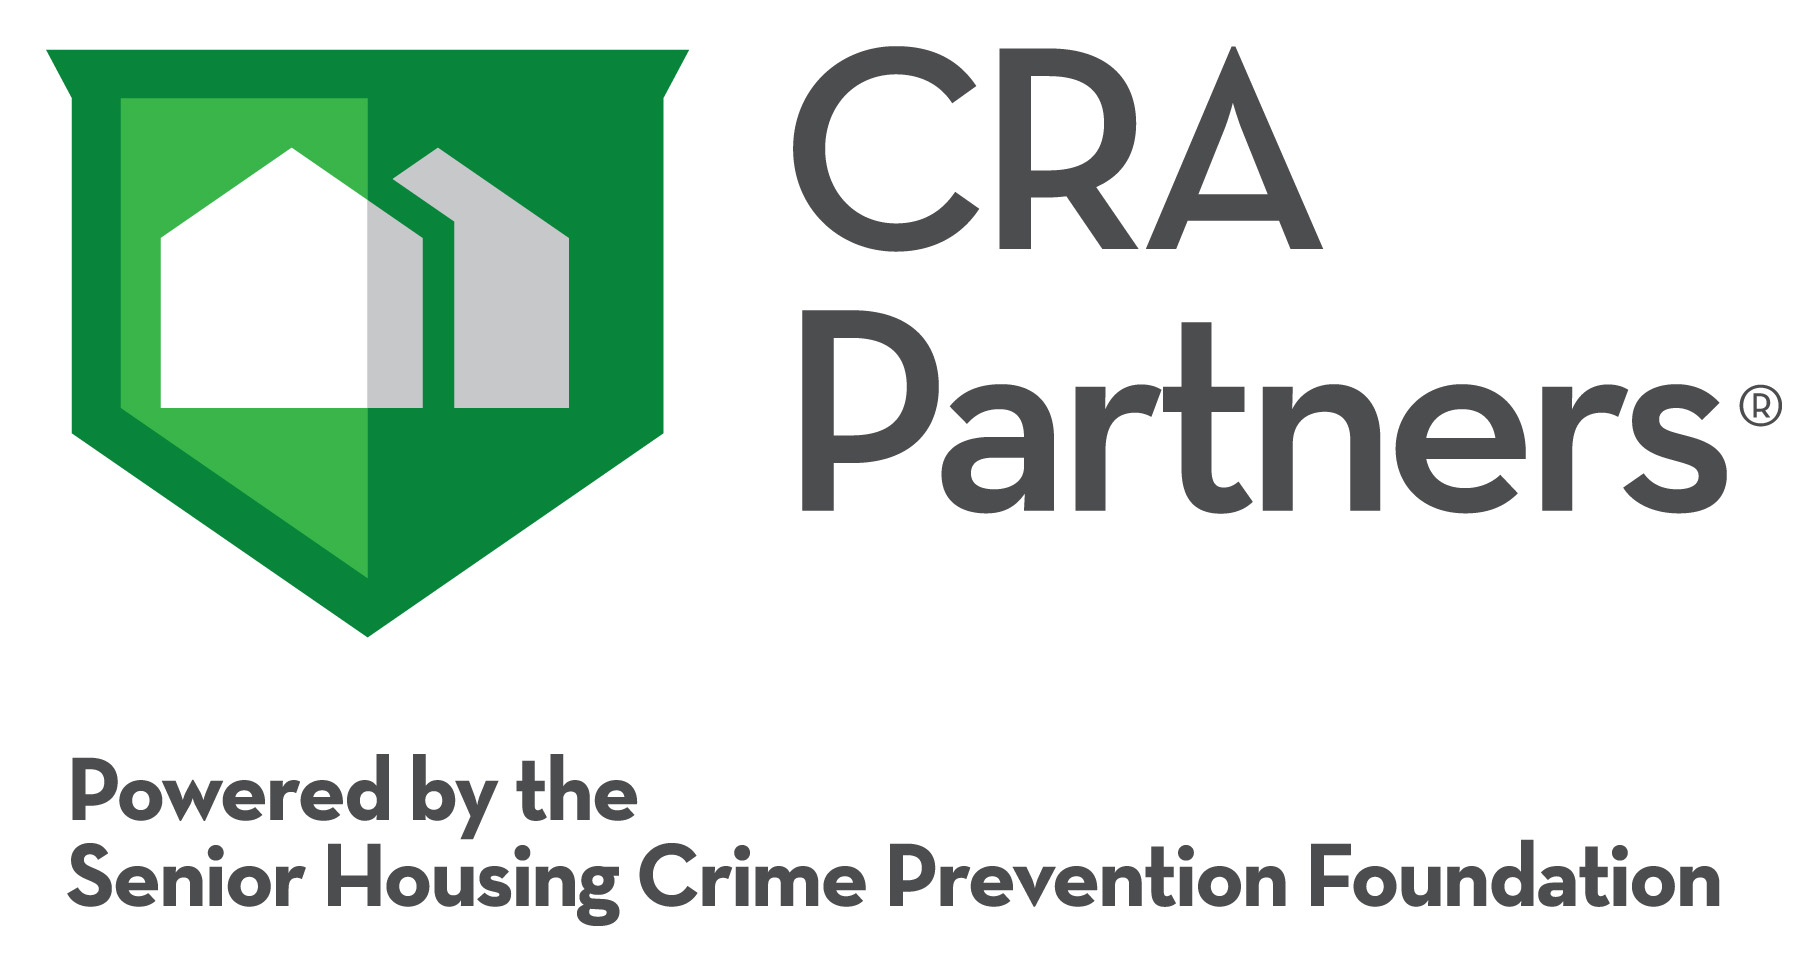 CRA Partners Powered by the Senior Housing Crime Prevention Foundation